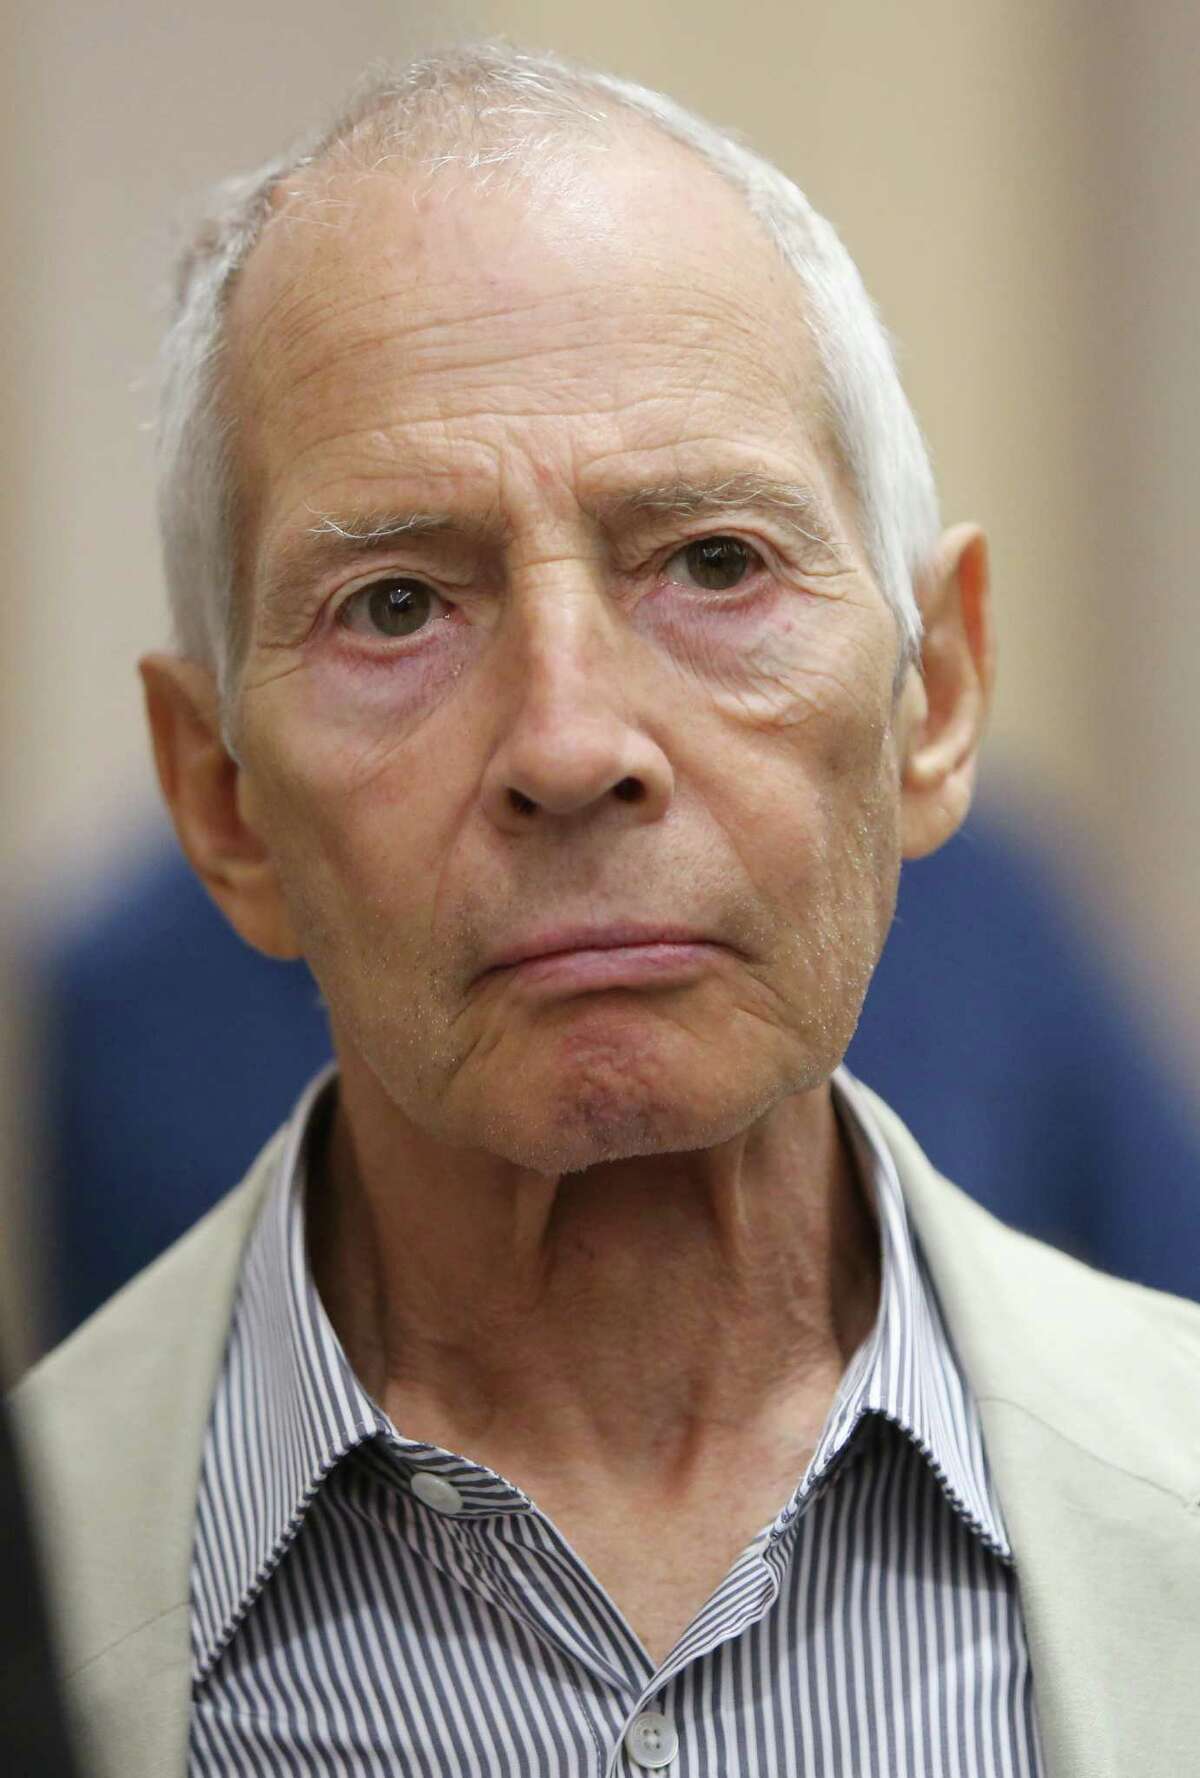 Robert Durst walks out of court after reseting hearing at the Harris County Criminal Justice Center on Friday, Aug. 15, 2014, in Houston. Robert Durst is accused of exposing himself and urinating inside a CVS store. According to police, Durst purchased a prescription at the CVS pharmacy, without any apparent provocation, Durst allegedly began urinating on the cash register, drenching a candy display. ( Mayra Beltran / Houston Chronicle )